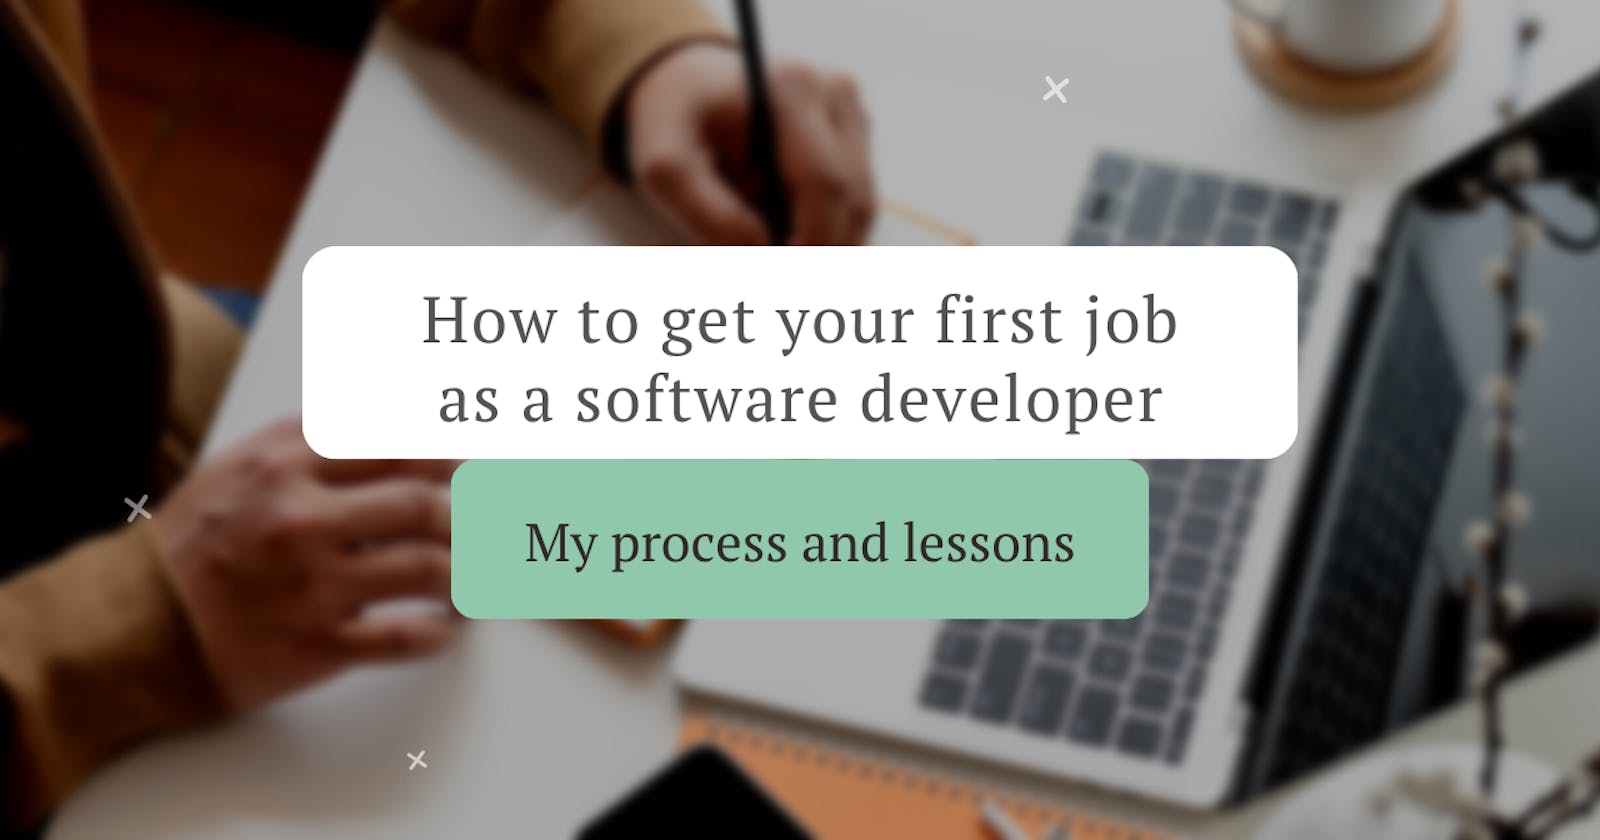 How to get your first job as a software developer